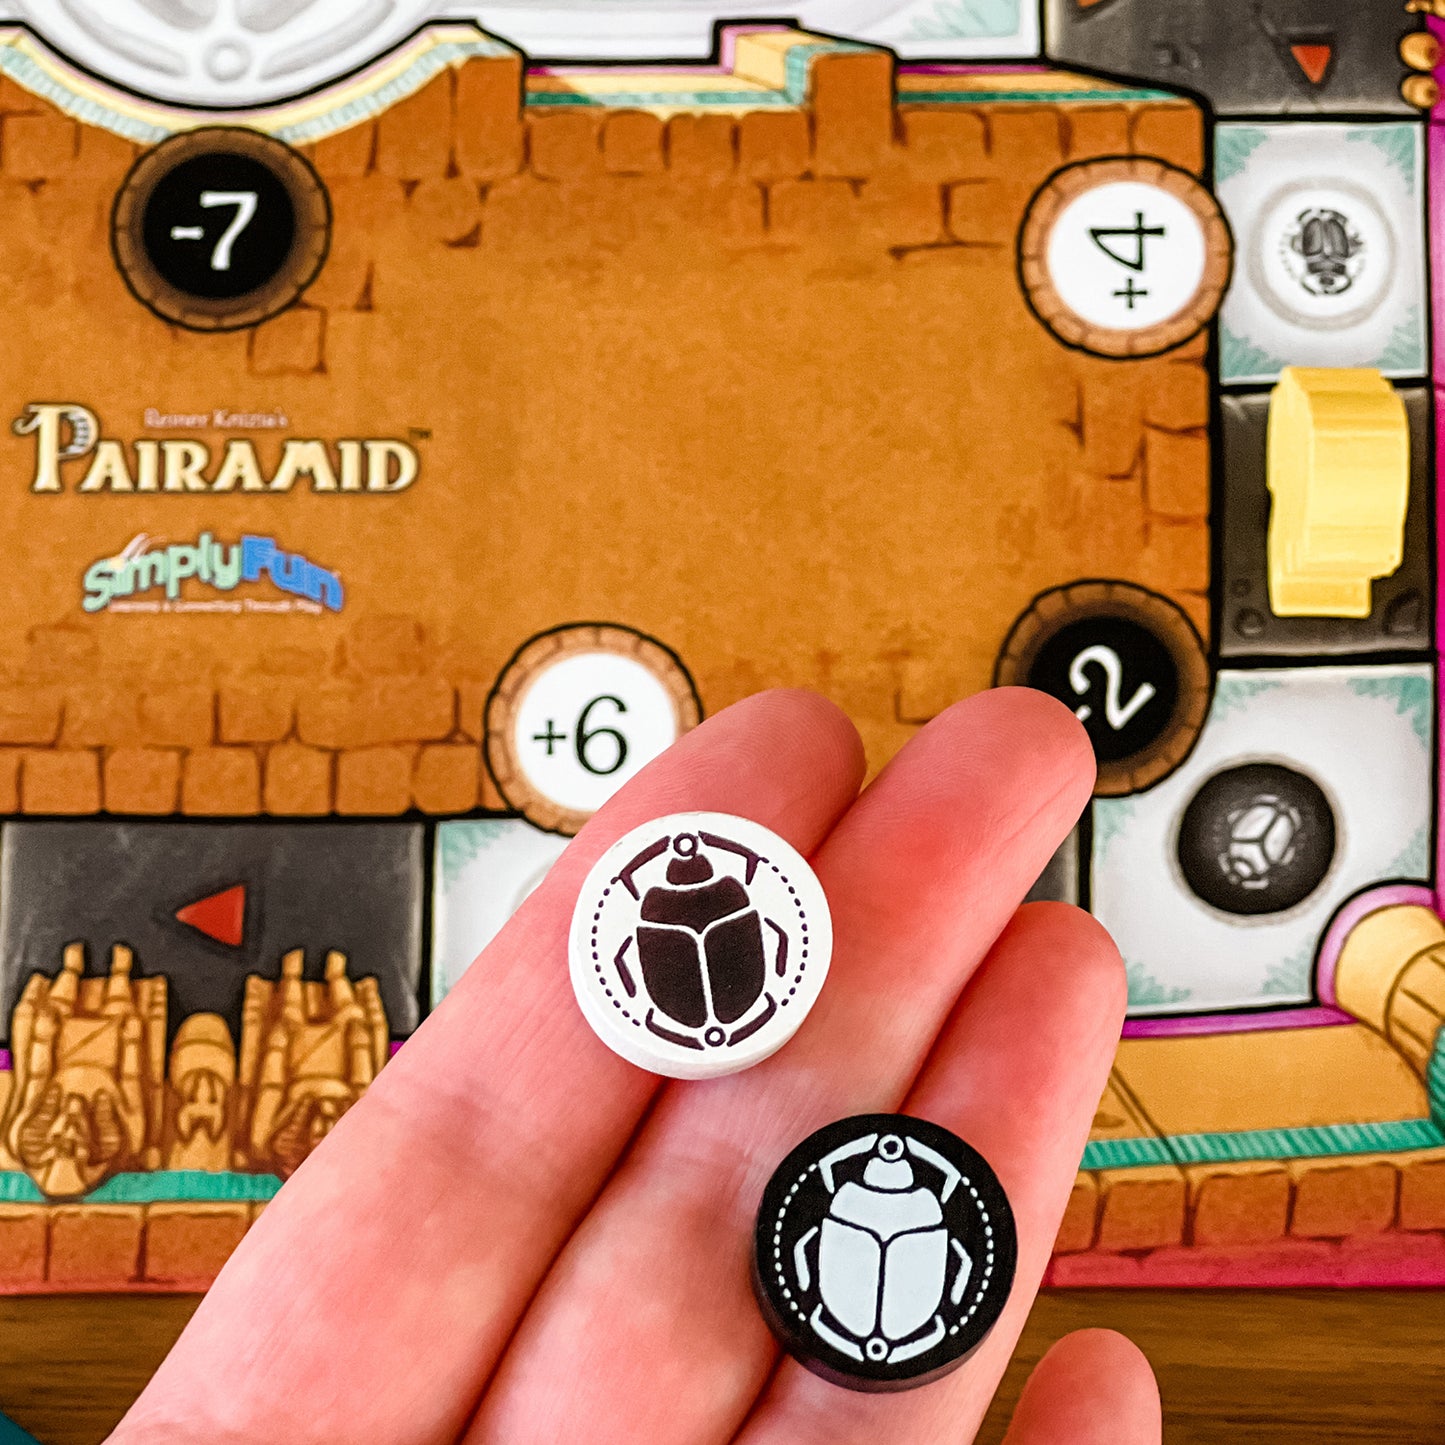 Pairamid by SimplyFun is a collaborative planning game for ages 8 and up.